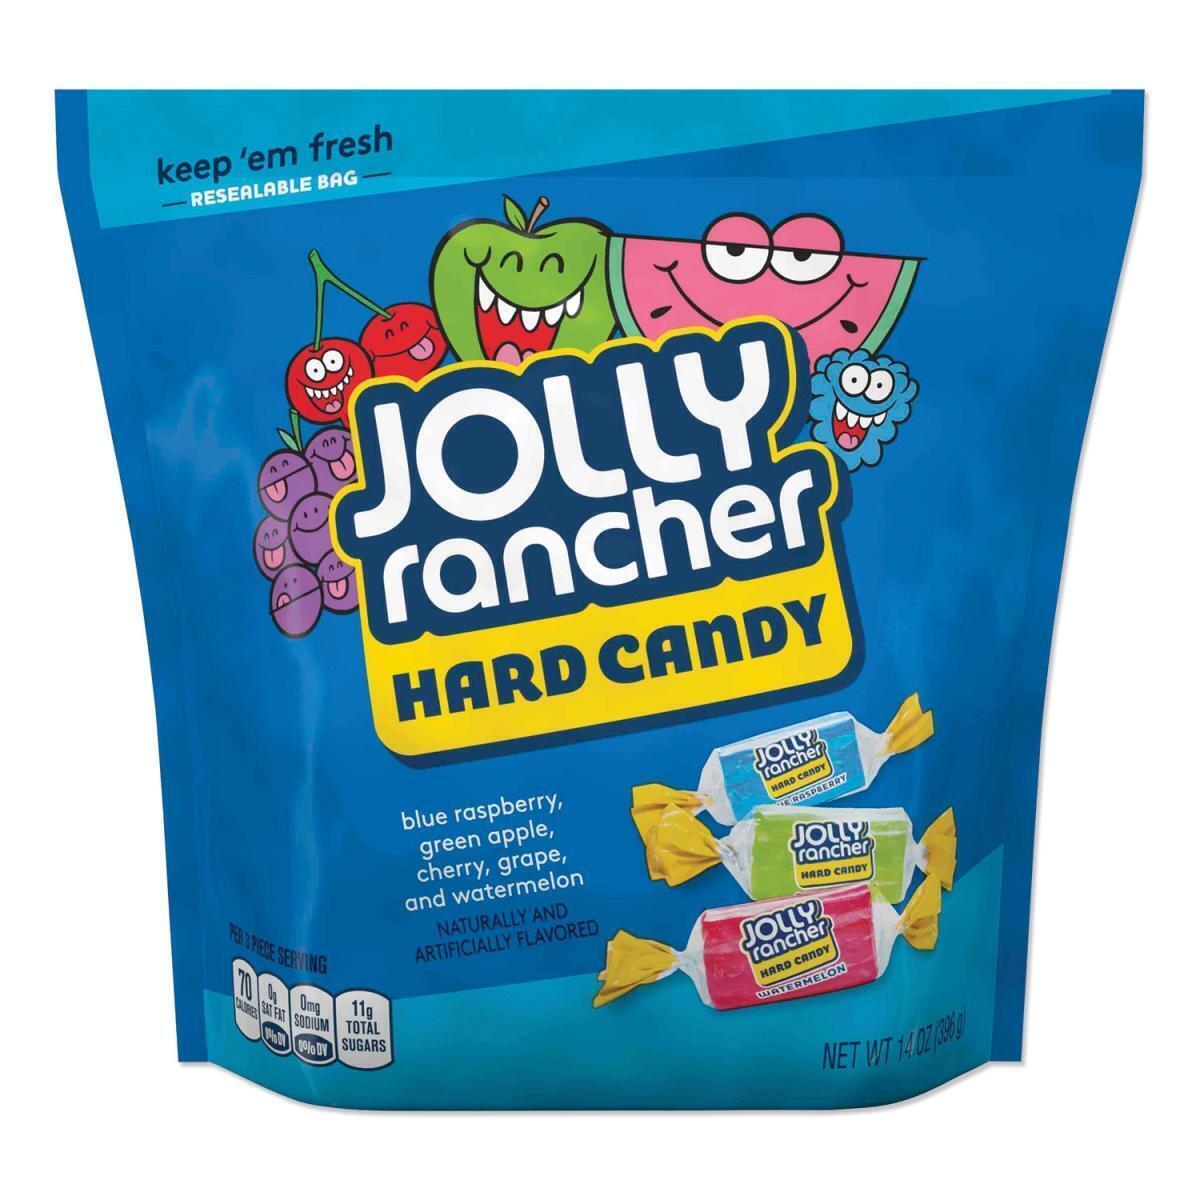 Hershey JLRHEC55686 14 oz Jolly Rancher Fruit Hard Candies - Assorted Color